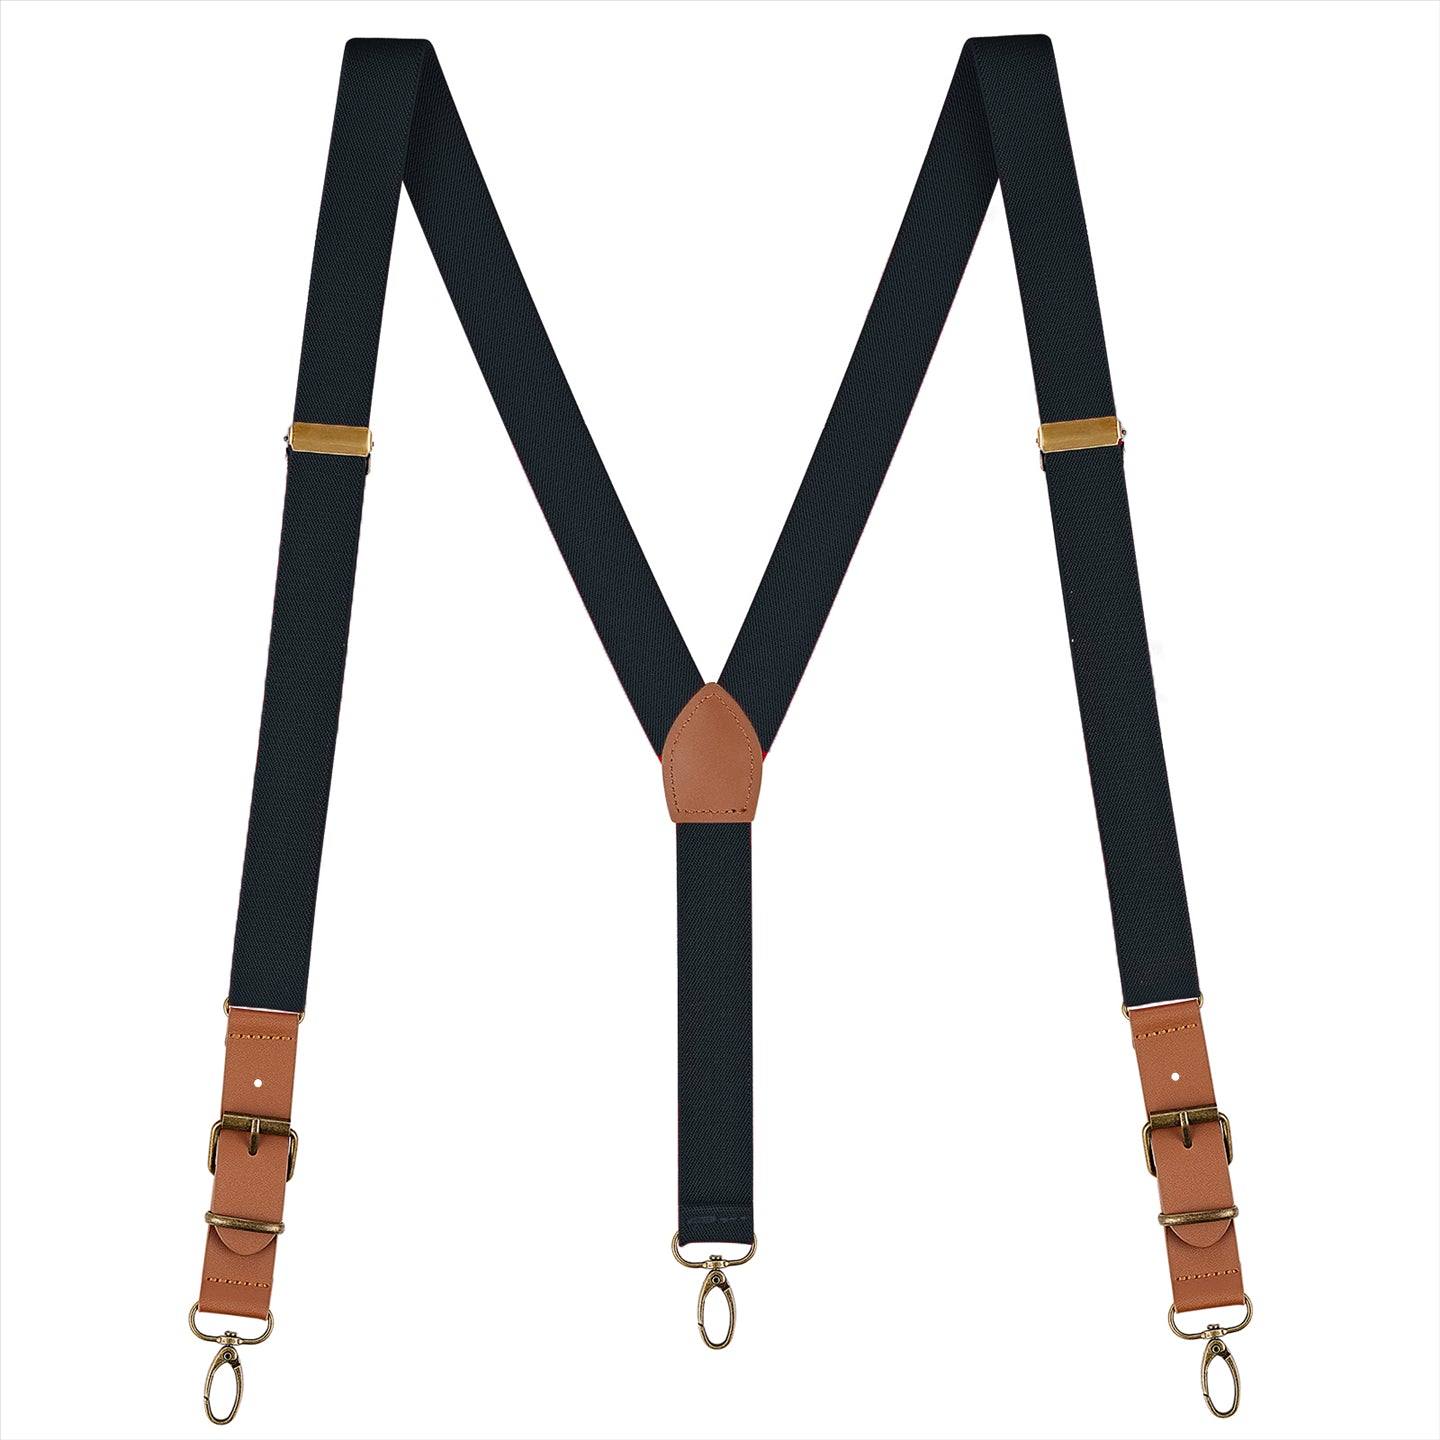 Buyless Fashion Leather End Suspenders for Men - 48